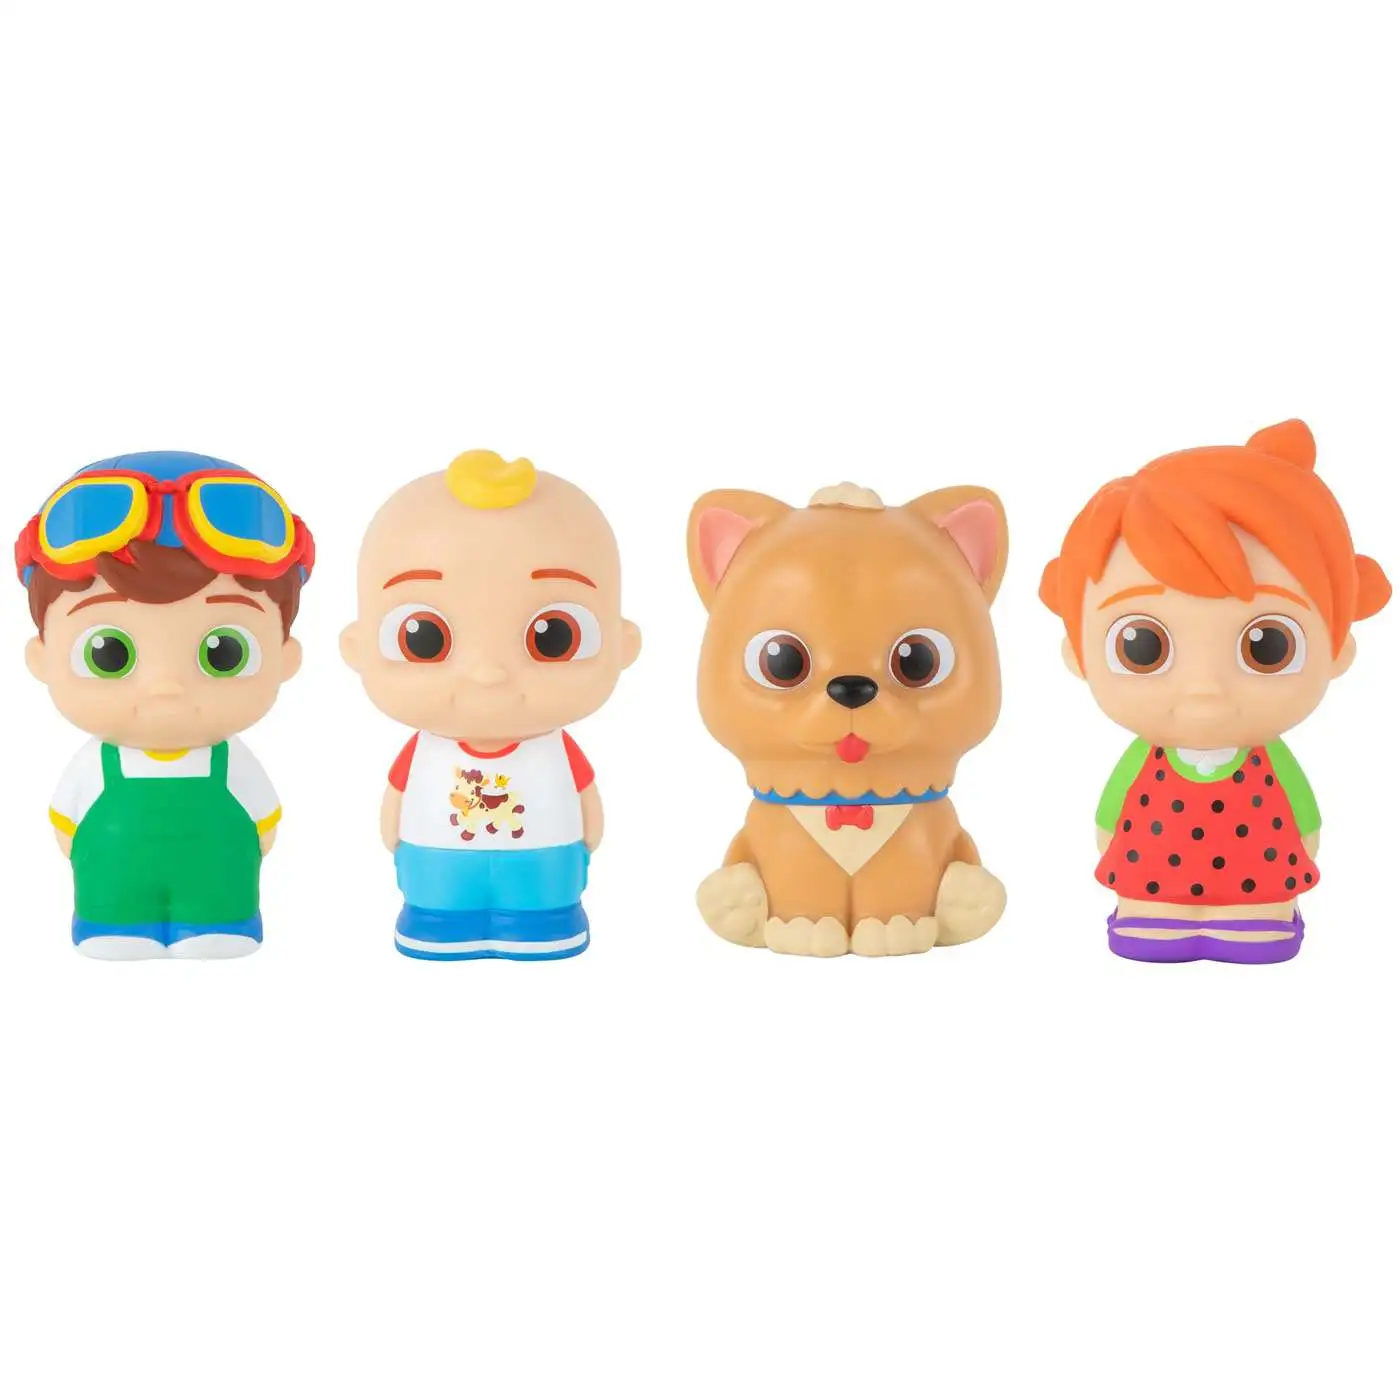 Cocomelon 4 Figure Pack - JJ & Family Figure Set - Family and Friends -  Includes JJ, YoYo, Tomtom, and Bingo The Dog - Toys for Kids, Infants and